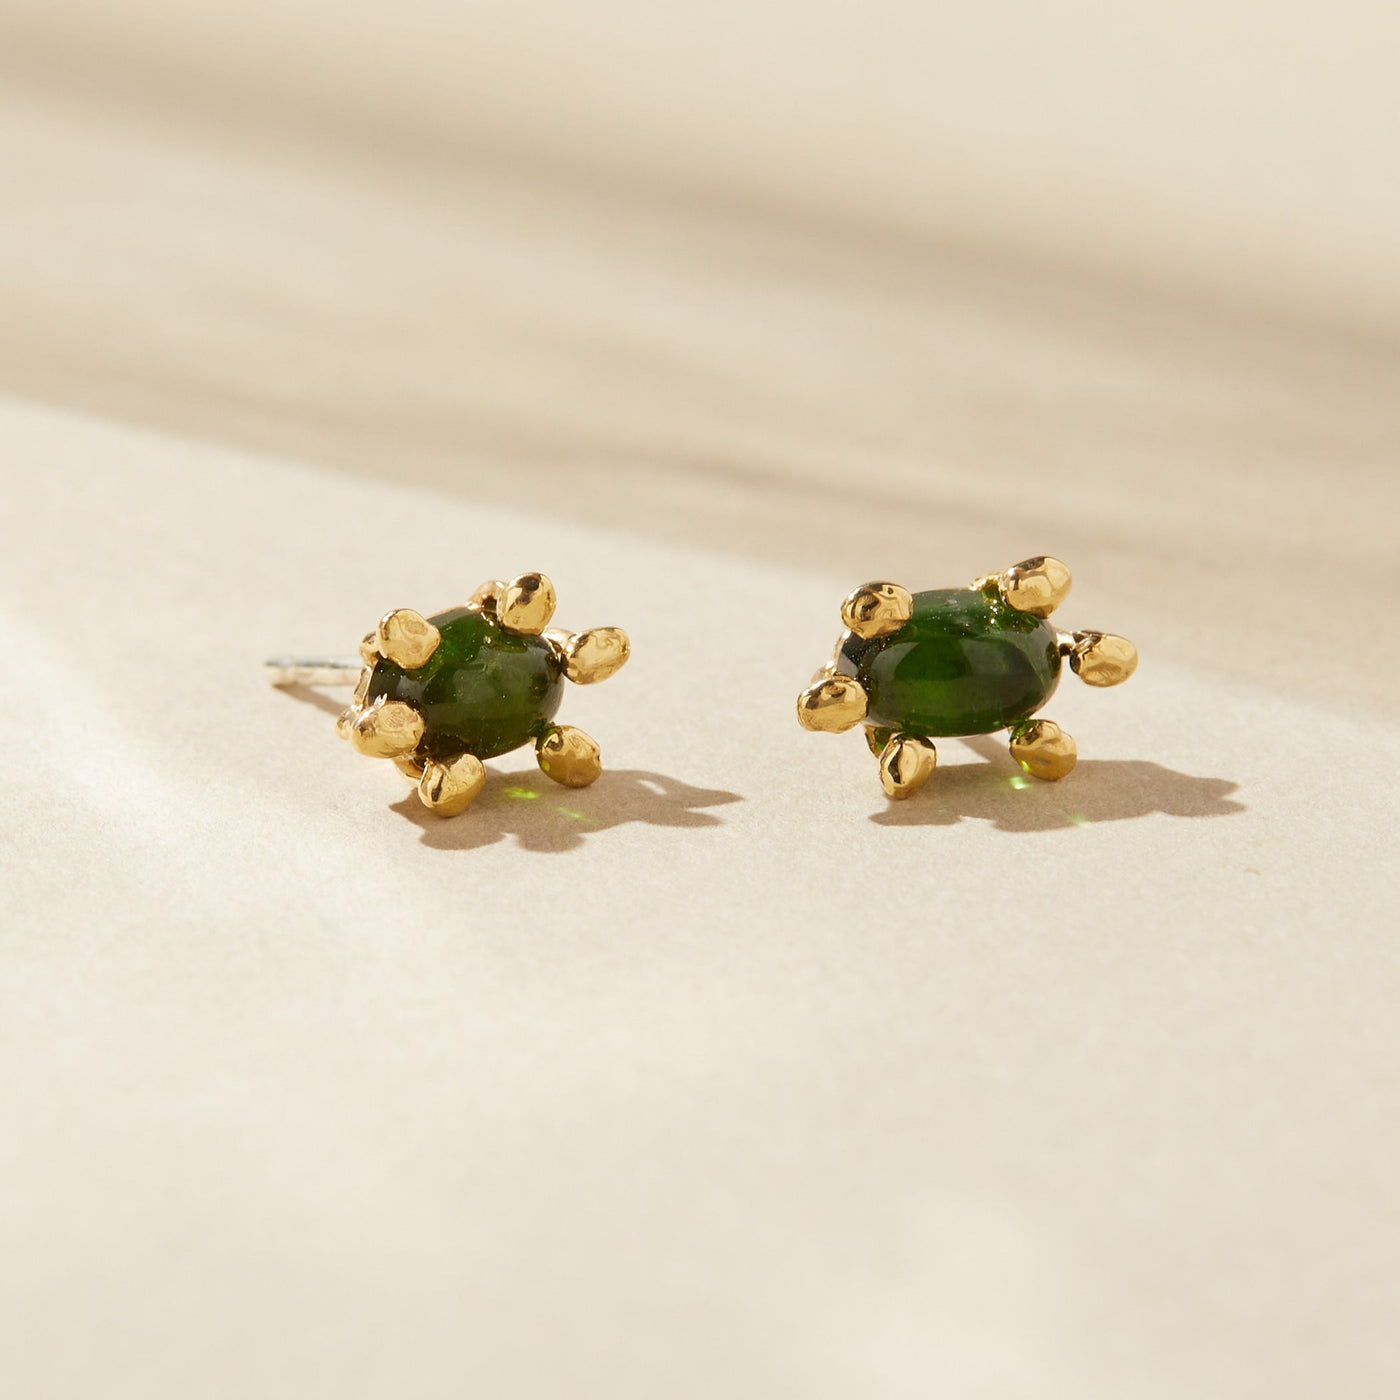 Aster Earrings with Green Tourmaline